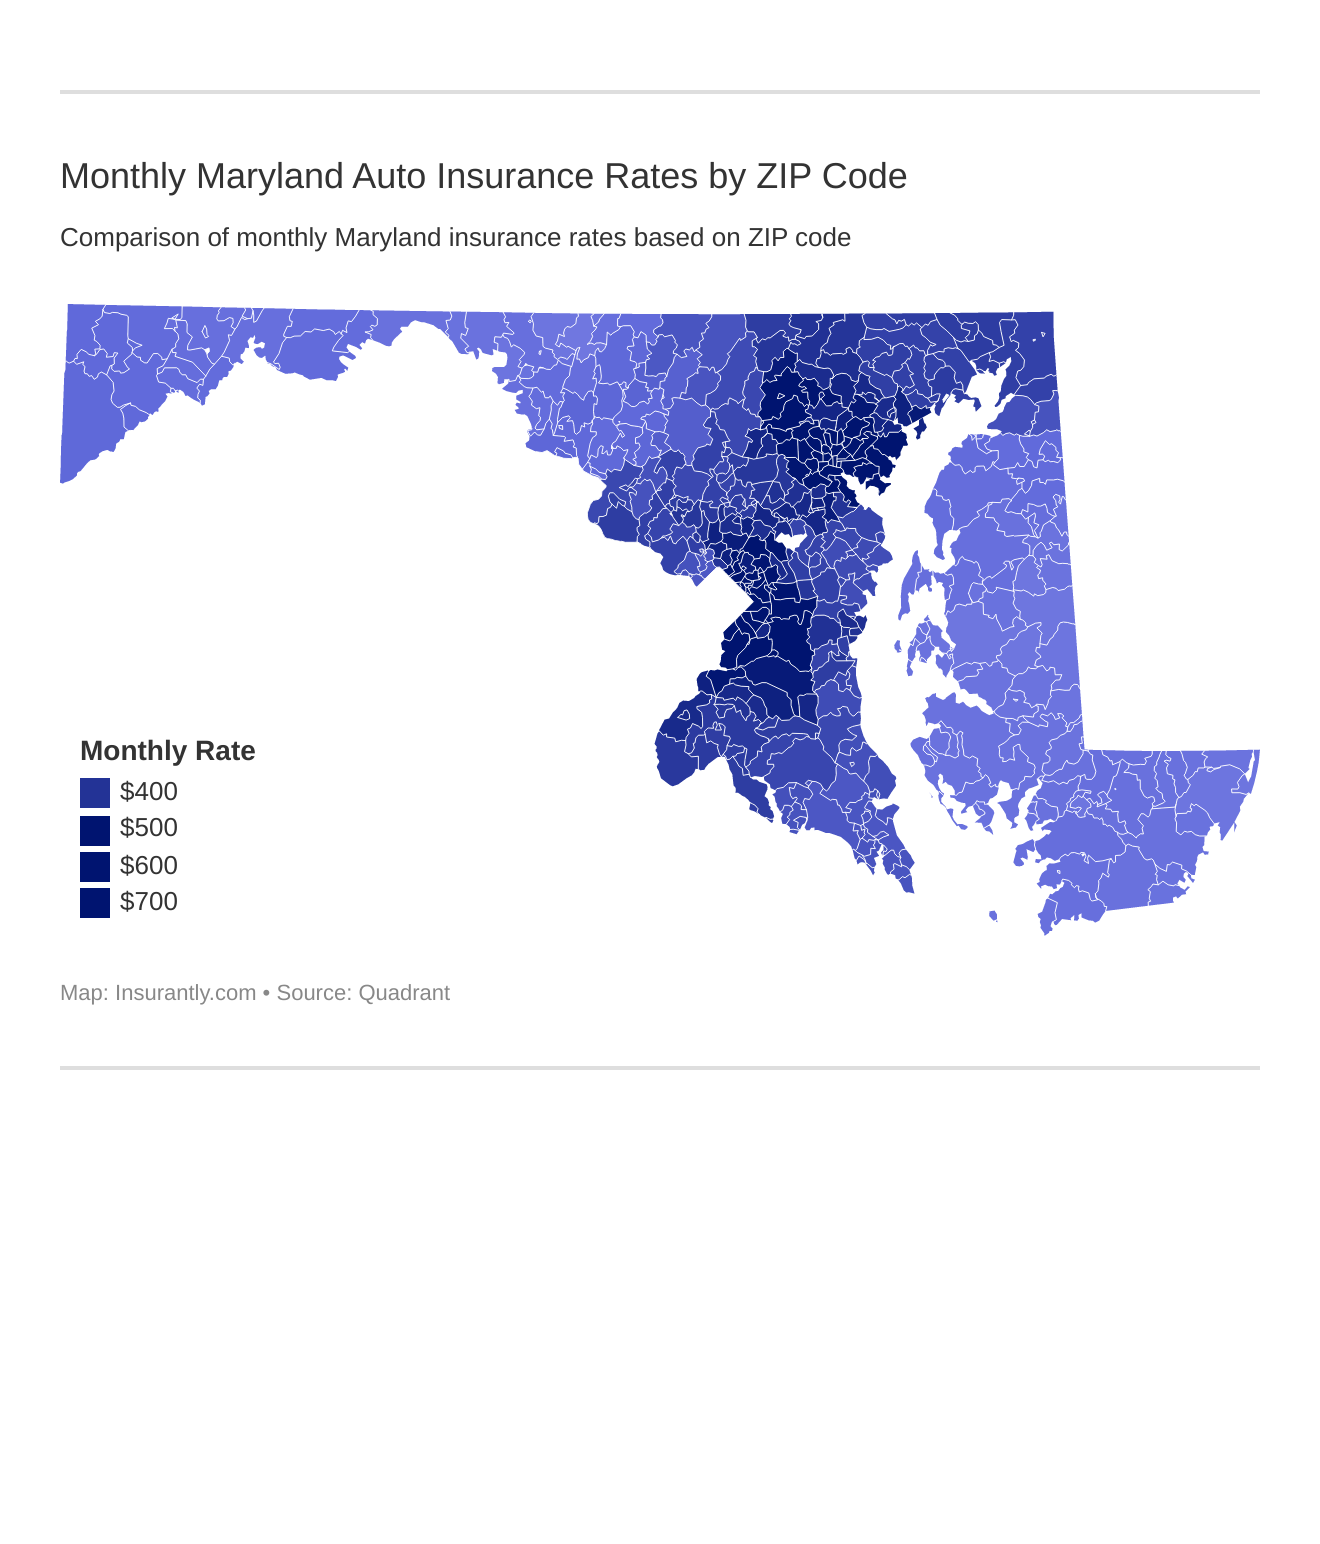 Monthly Maryland Auto Insurance Rates by ZIP Code